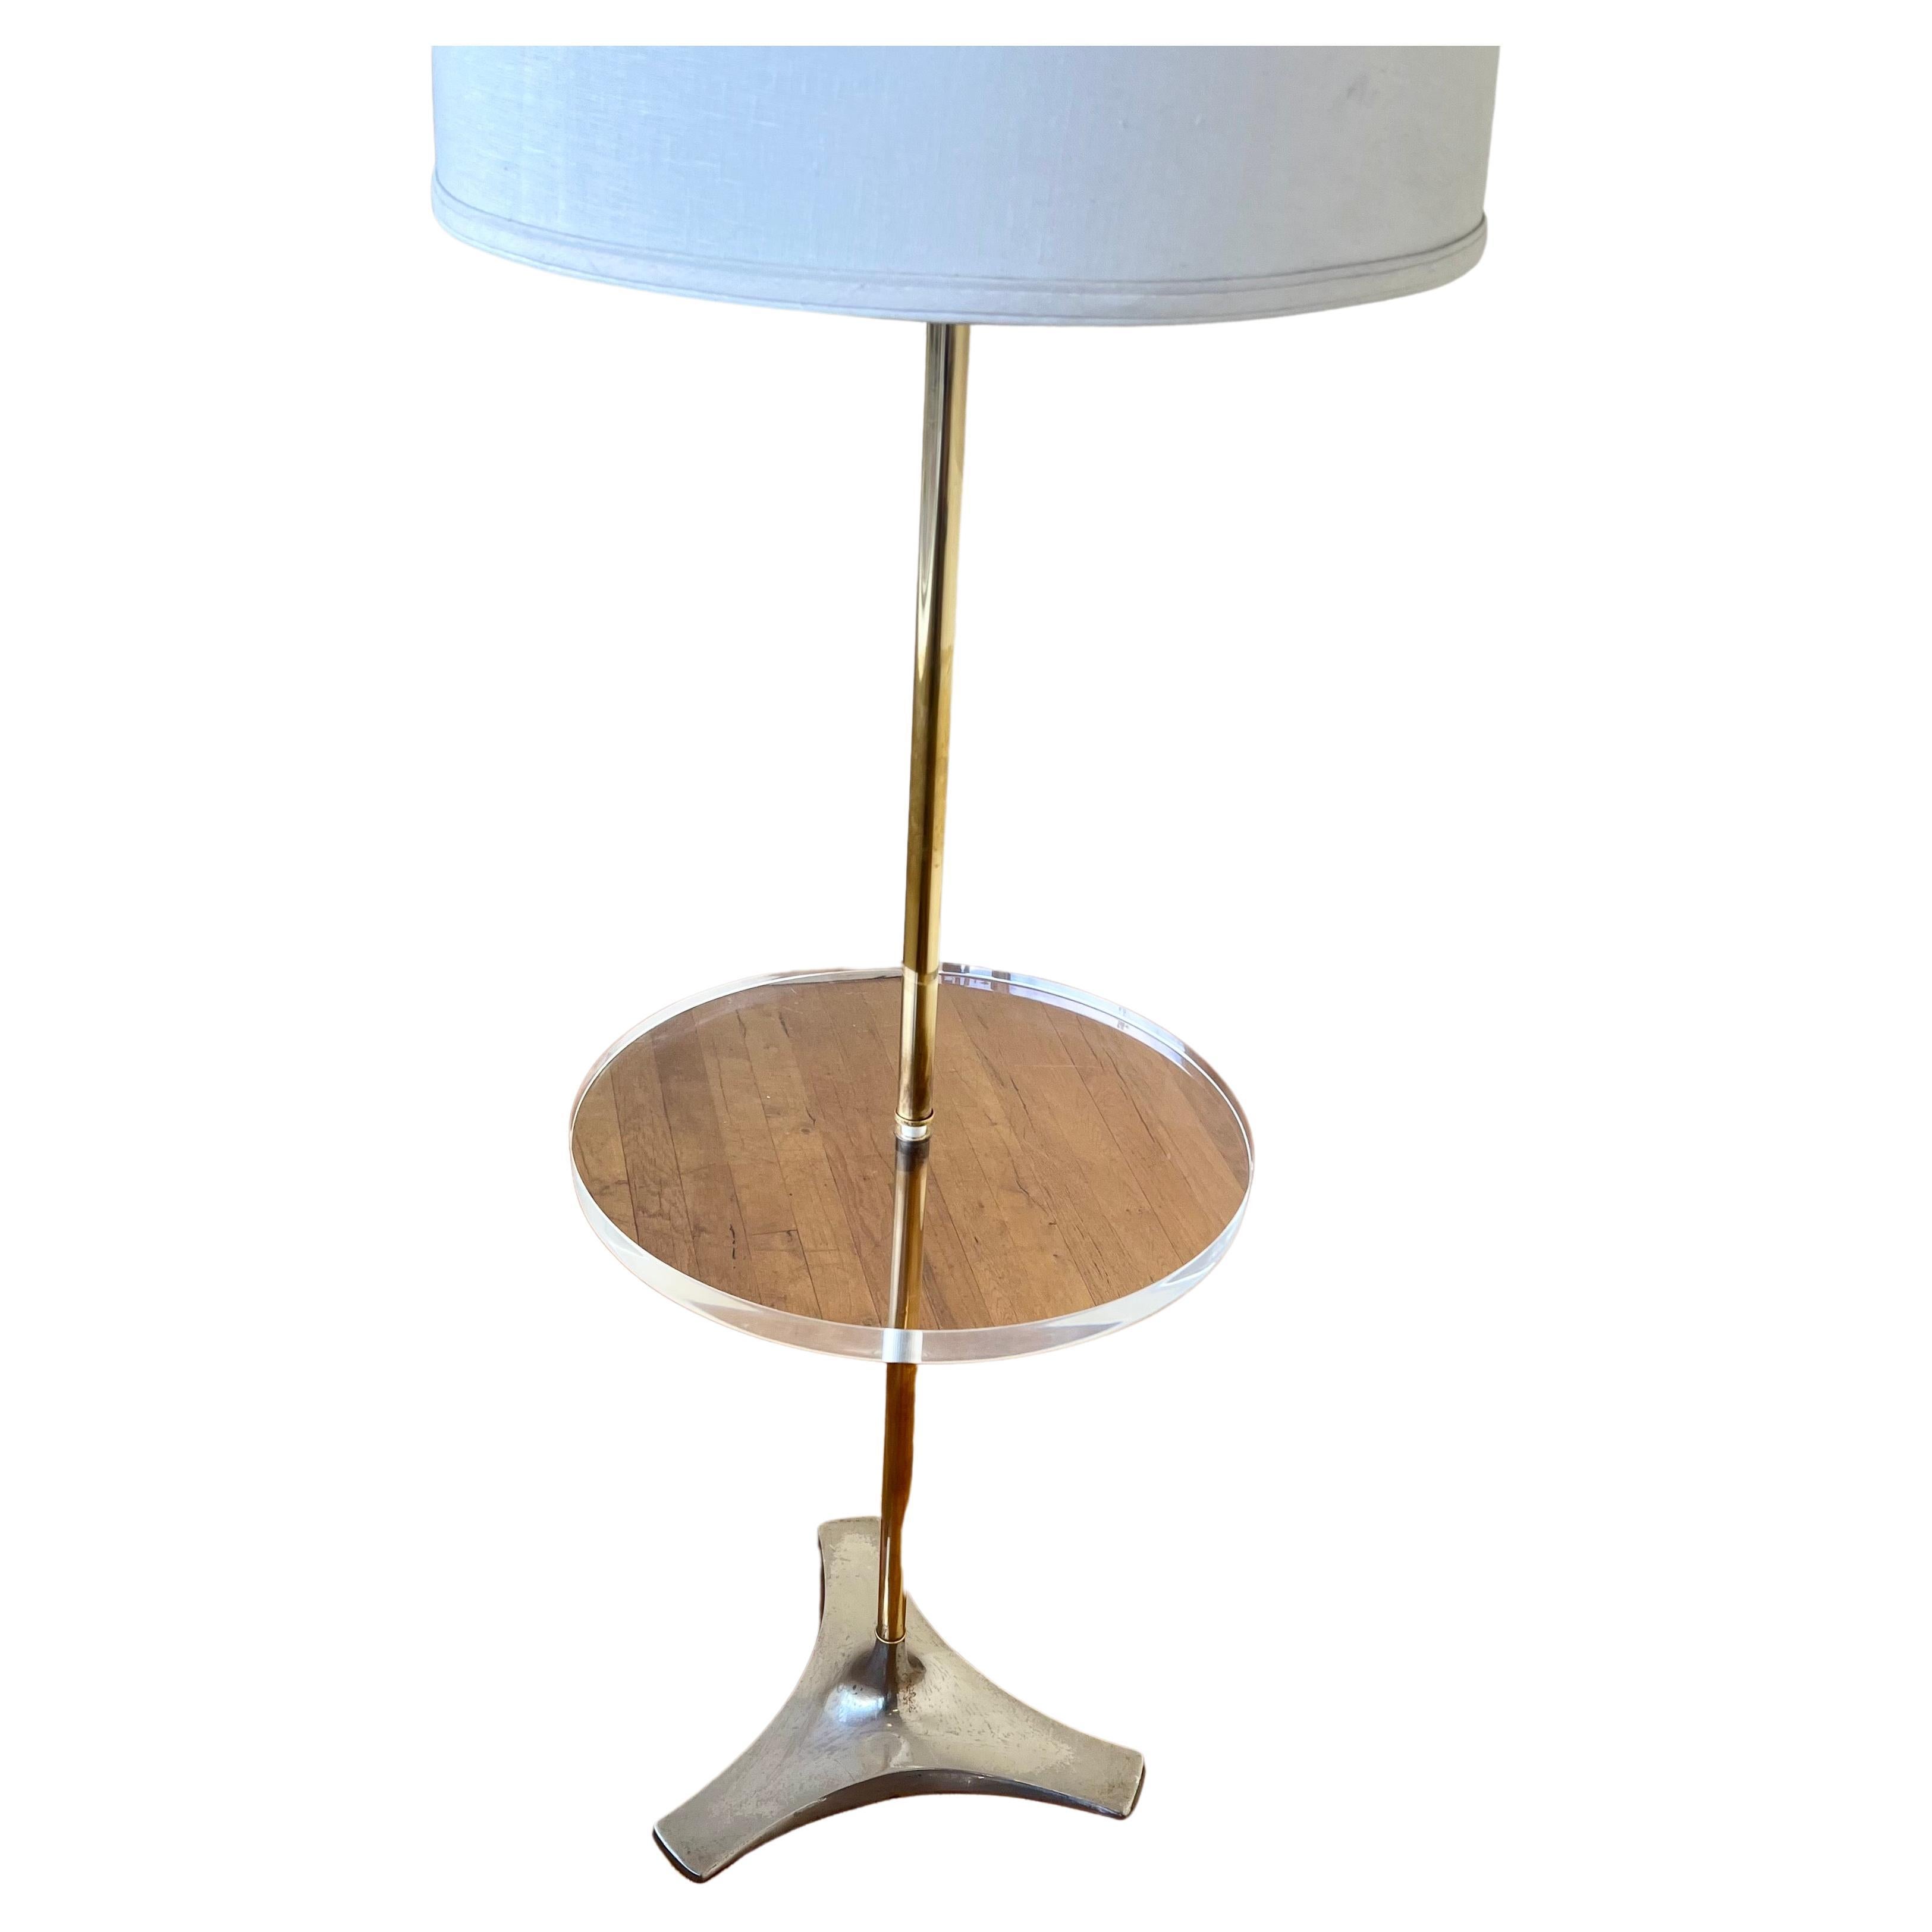 Beautiful elegant Table lamp by Laurel Lighting , circa 1970's brass polished poles with solid one inch thick lucite round top. we have this piece remade its been rewired and chrome star base, with a nice lampshade, nice condition beautiful and